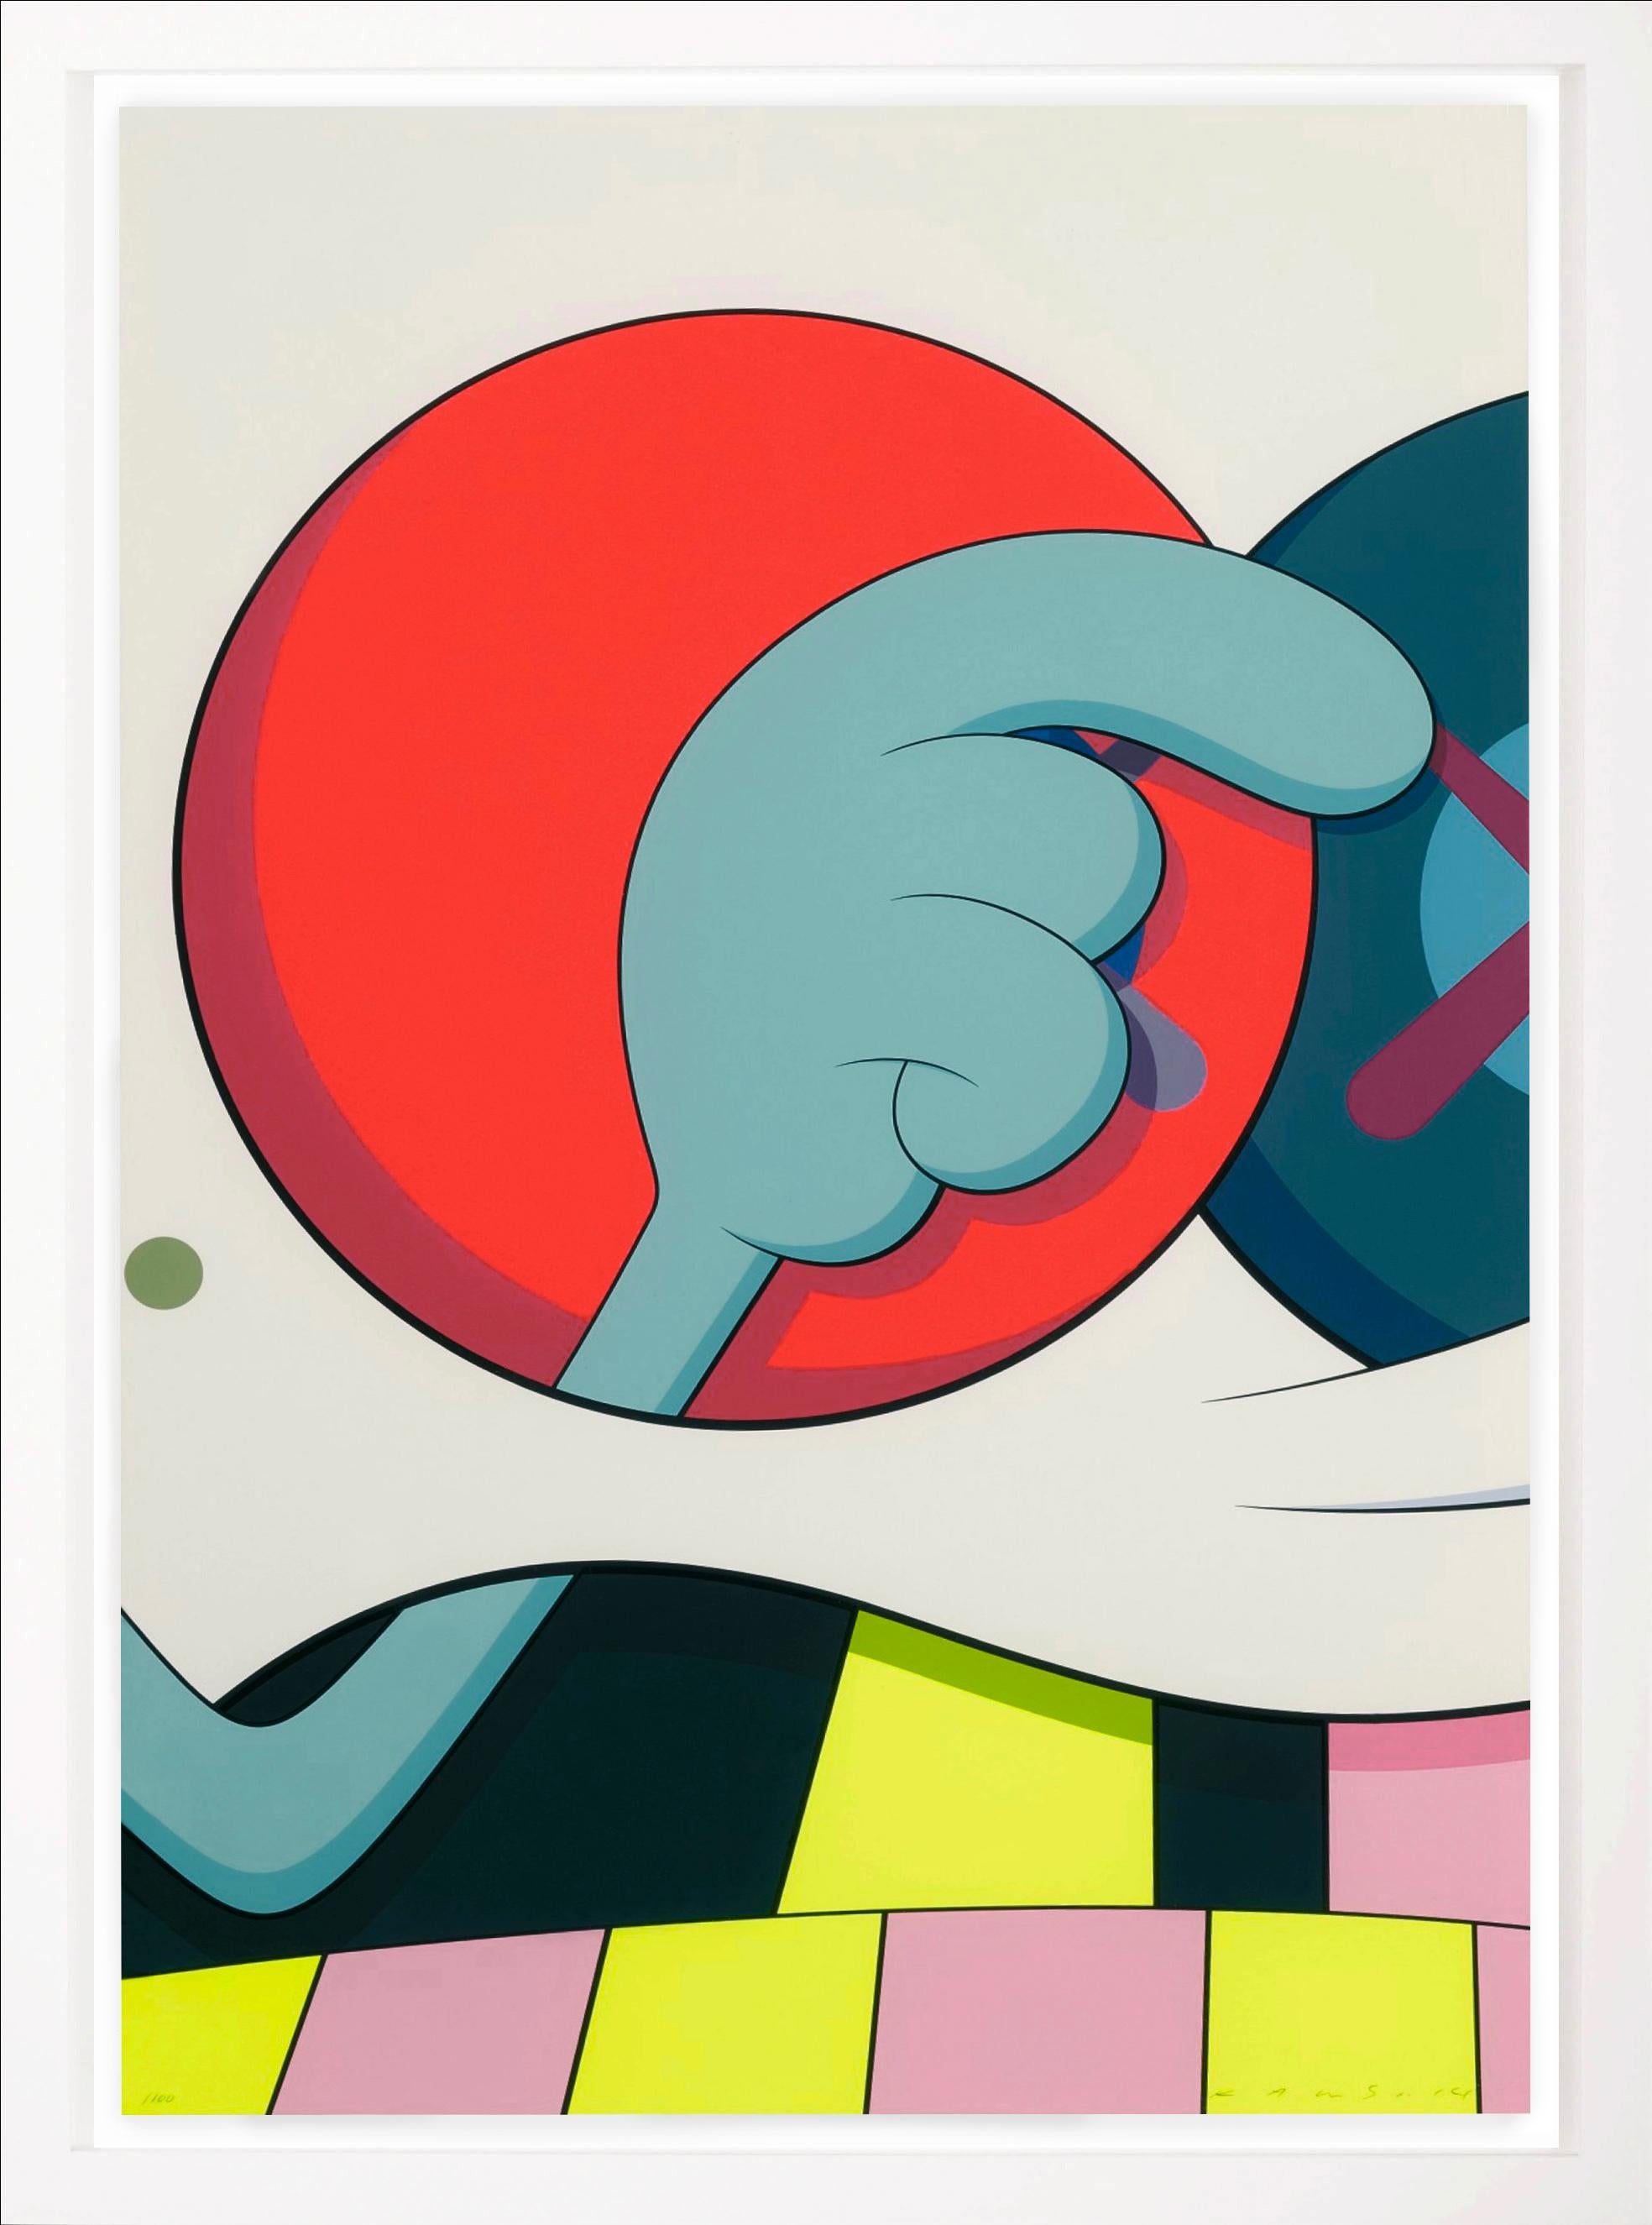 KAWS 'Man's Best Friend' (Full Portfolio) Screenprints, 2016 is an unknown edition. Each print measures 35 x 32 in. / 88.9 x 58.4 cm. Signed, numbered, and dated on recto. 

KAWS, born in 1974, is a New-York based artist who first gained